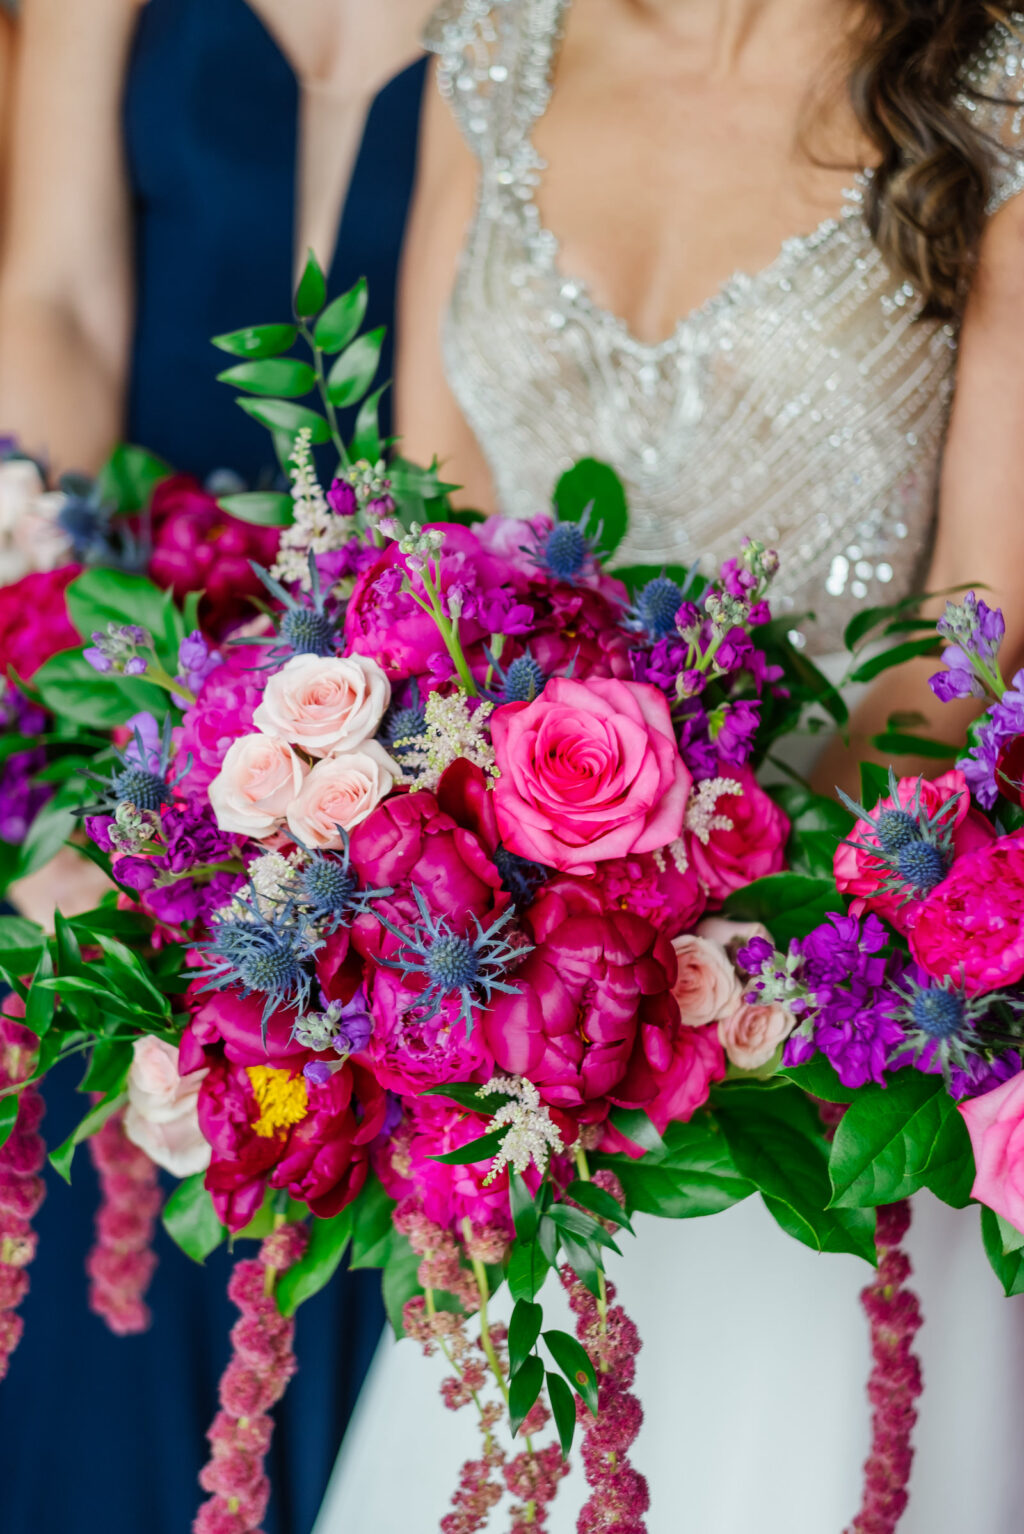 Bride Holding Jewel Tone Floral Bouquet, Pink and Fuschia Roses and Peonies, Purple Flowers, Thistle, Greenery Leaves, Hanging Amaranthus | Tampa Bay Wedding Florist Iza's Flowers